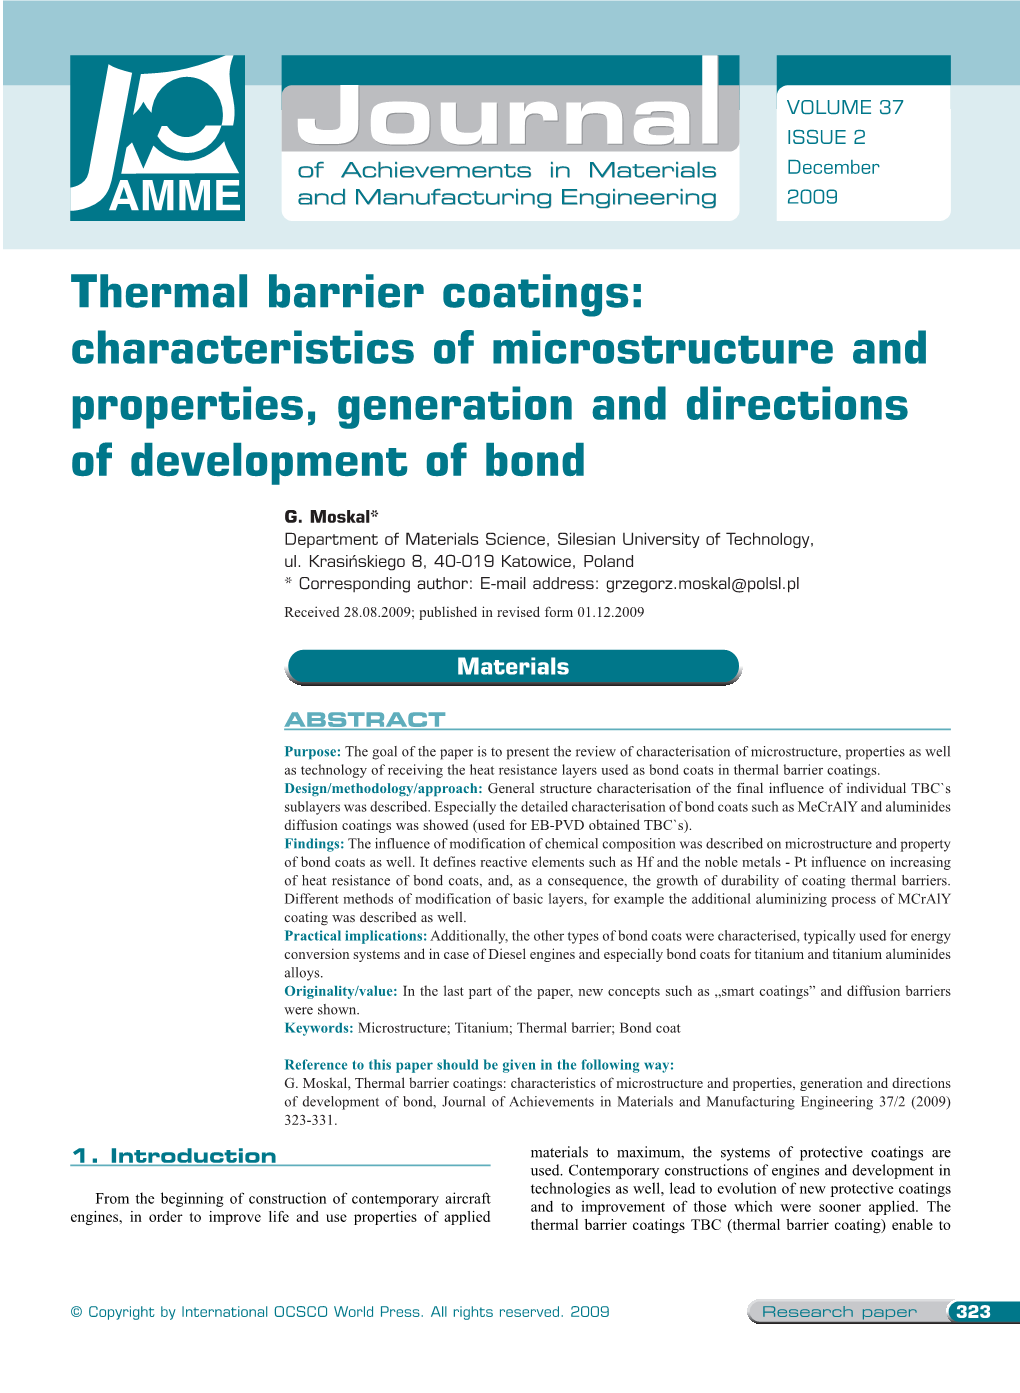 Thermal Barrier Coatings: Characteristics of Microstructure and Properties, Generation and Directions of Development of Bond